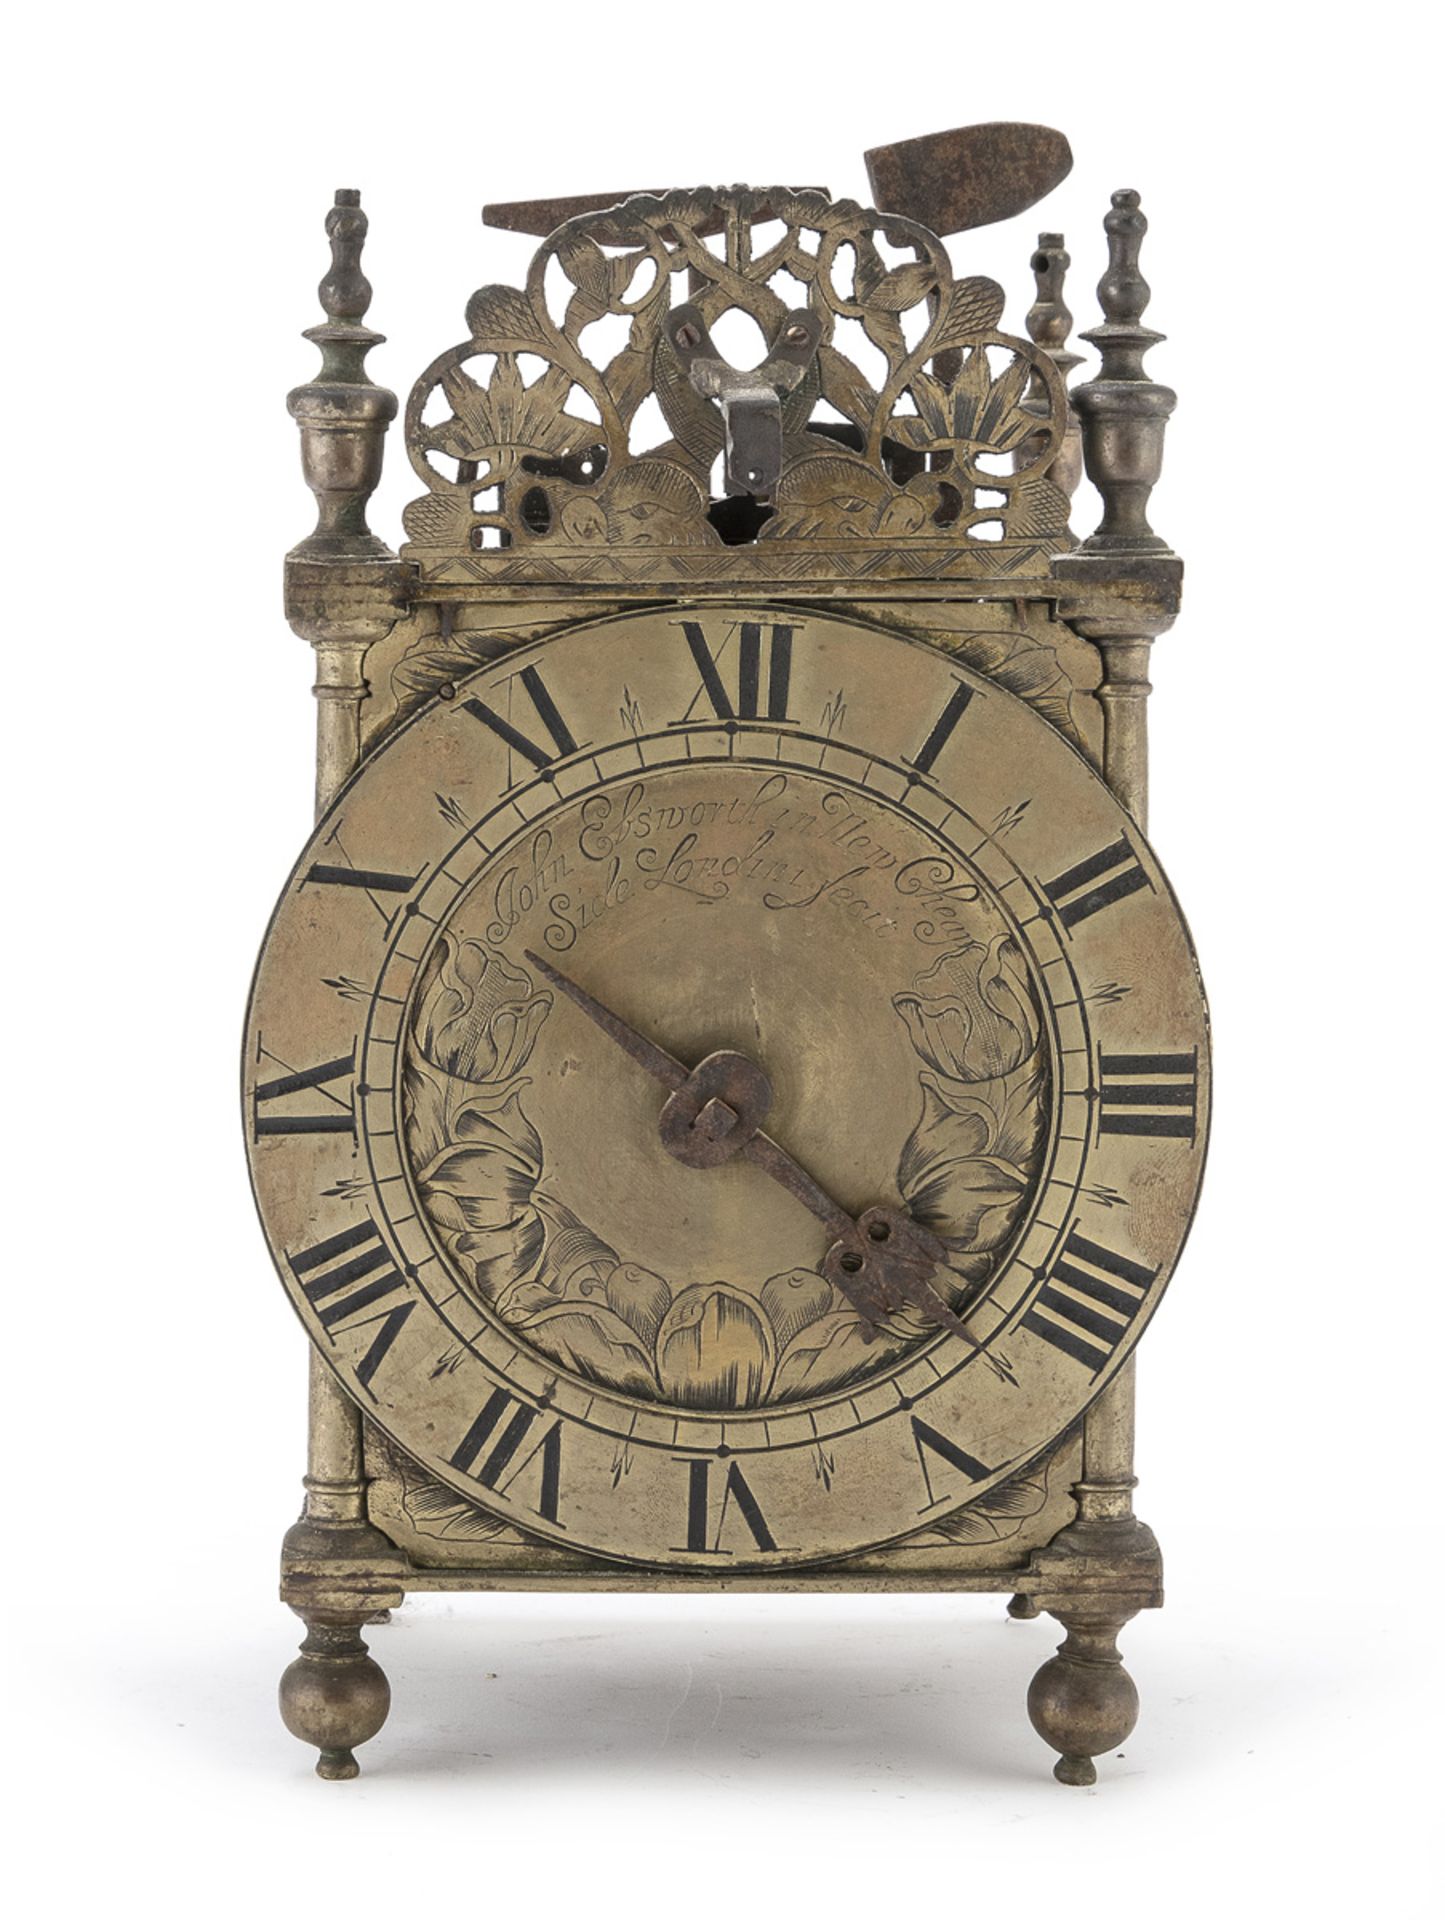 TABLE CLOCK IN BRONZE ENGLAND 18TH CENTURY